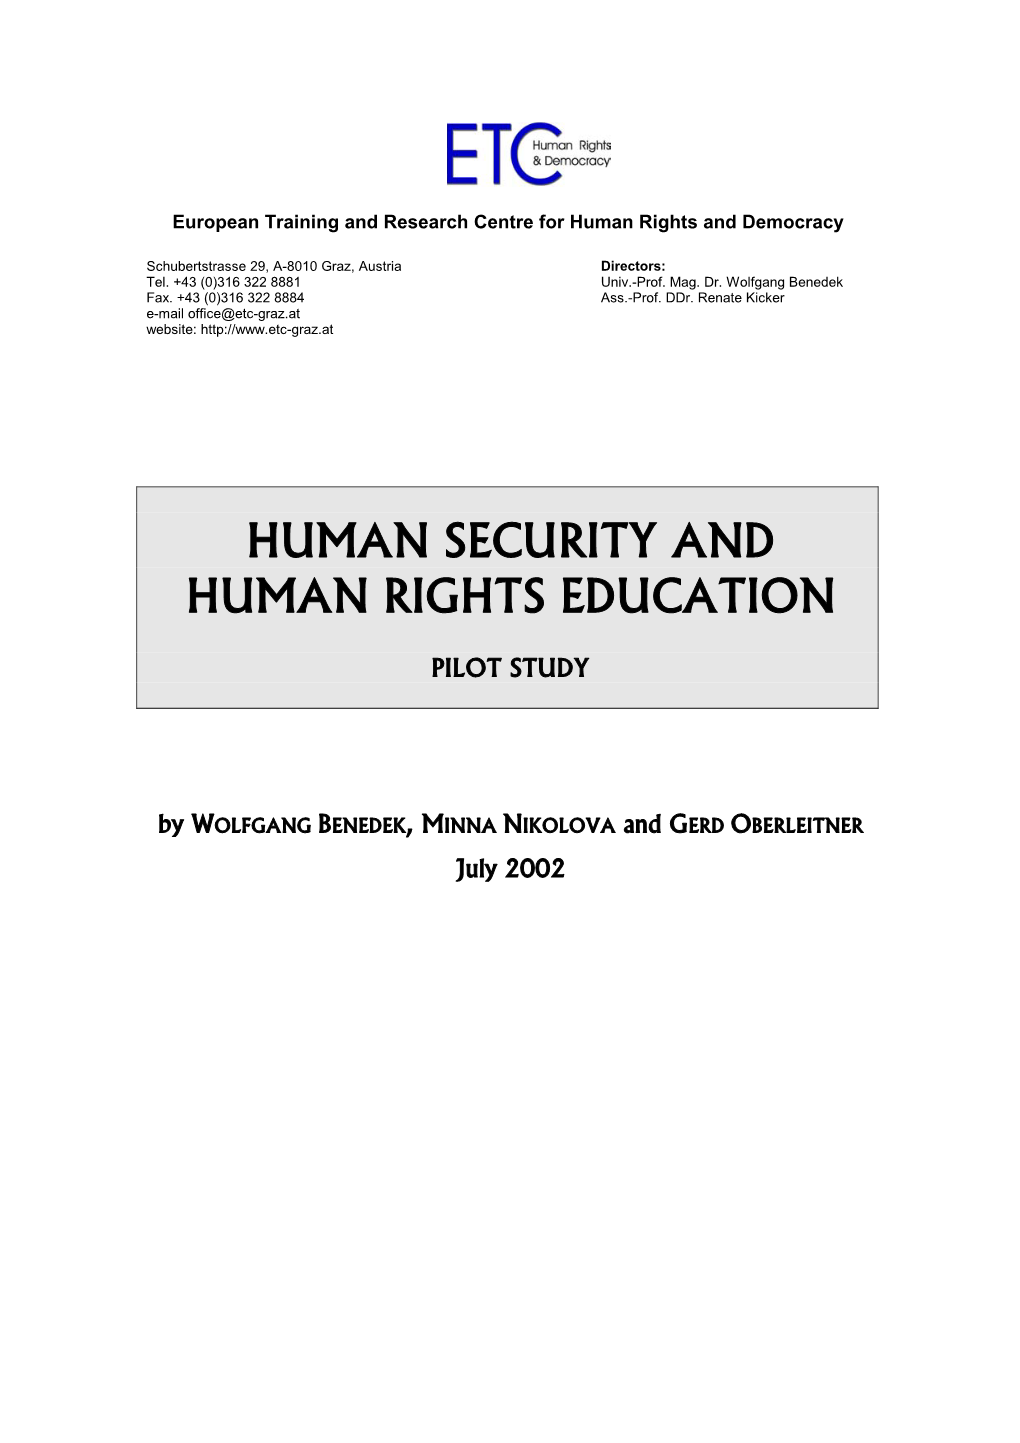 Human Security and Human Rights Education